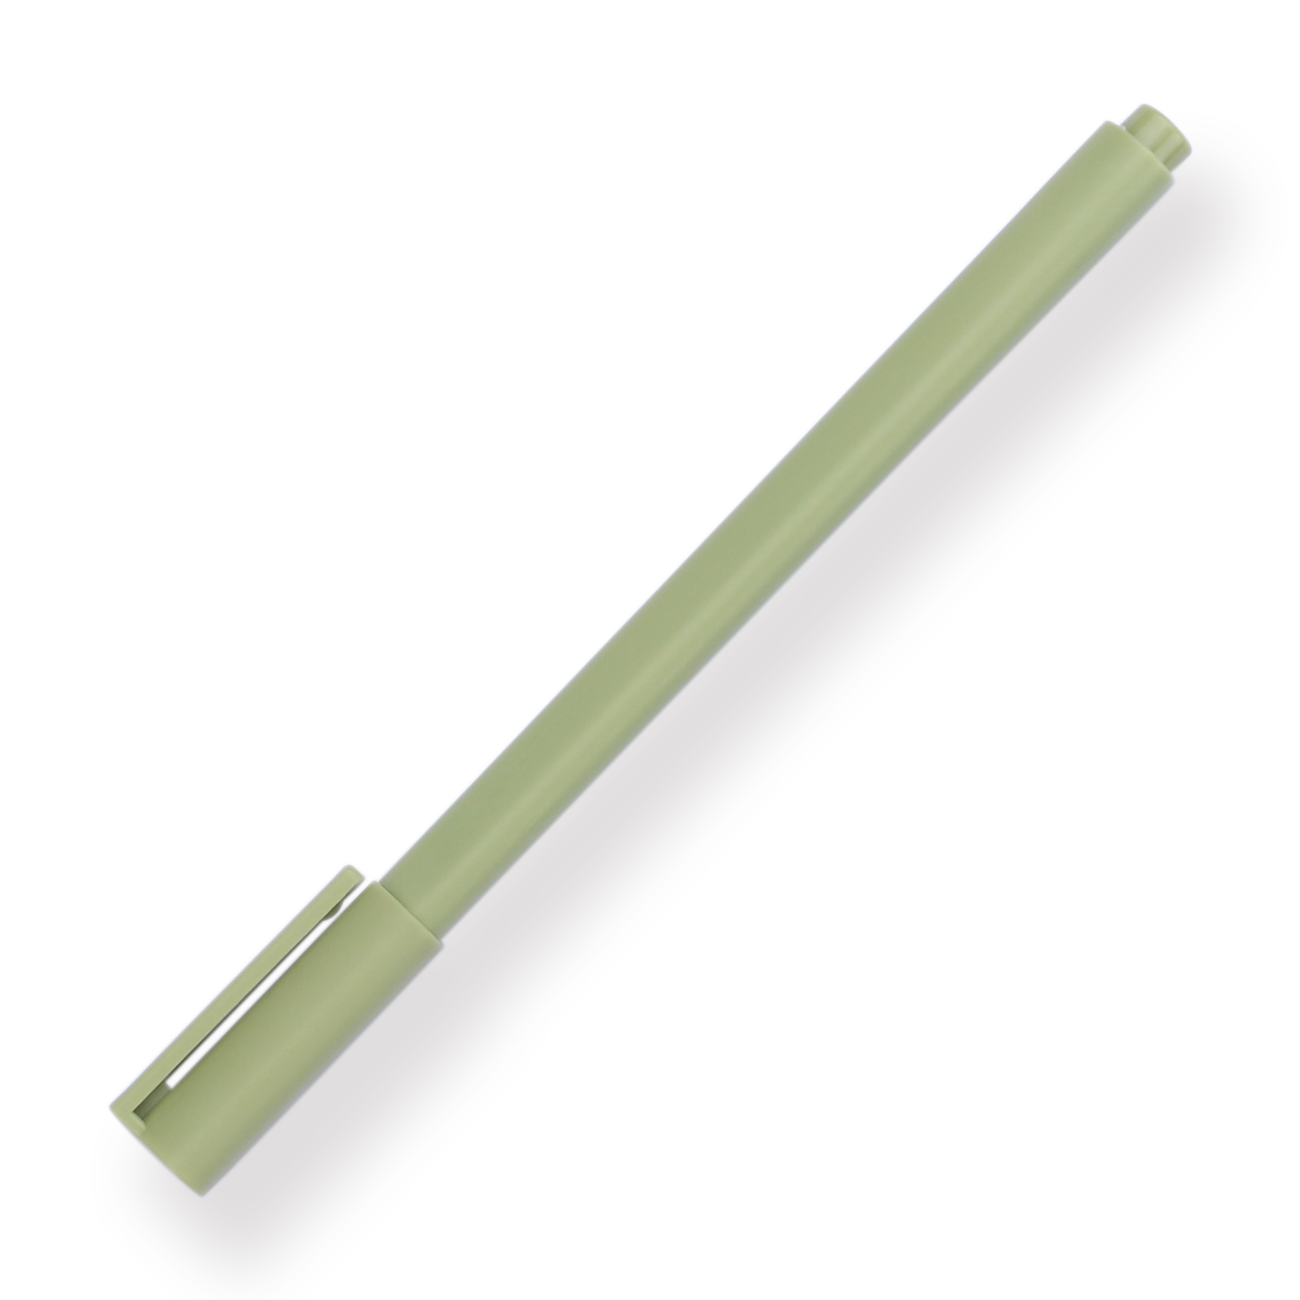 Non-Sharpening Pencil - Green Body - Stationery Pal